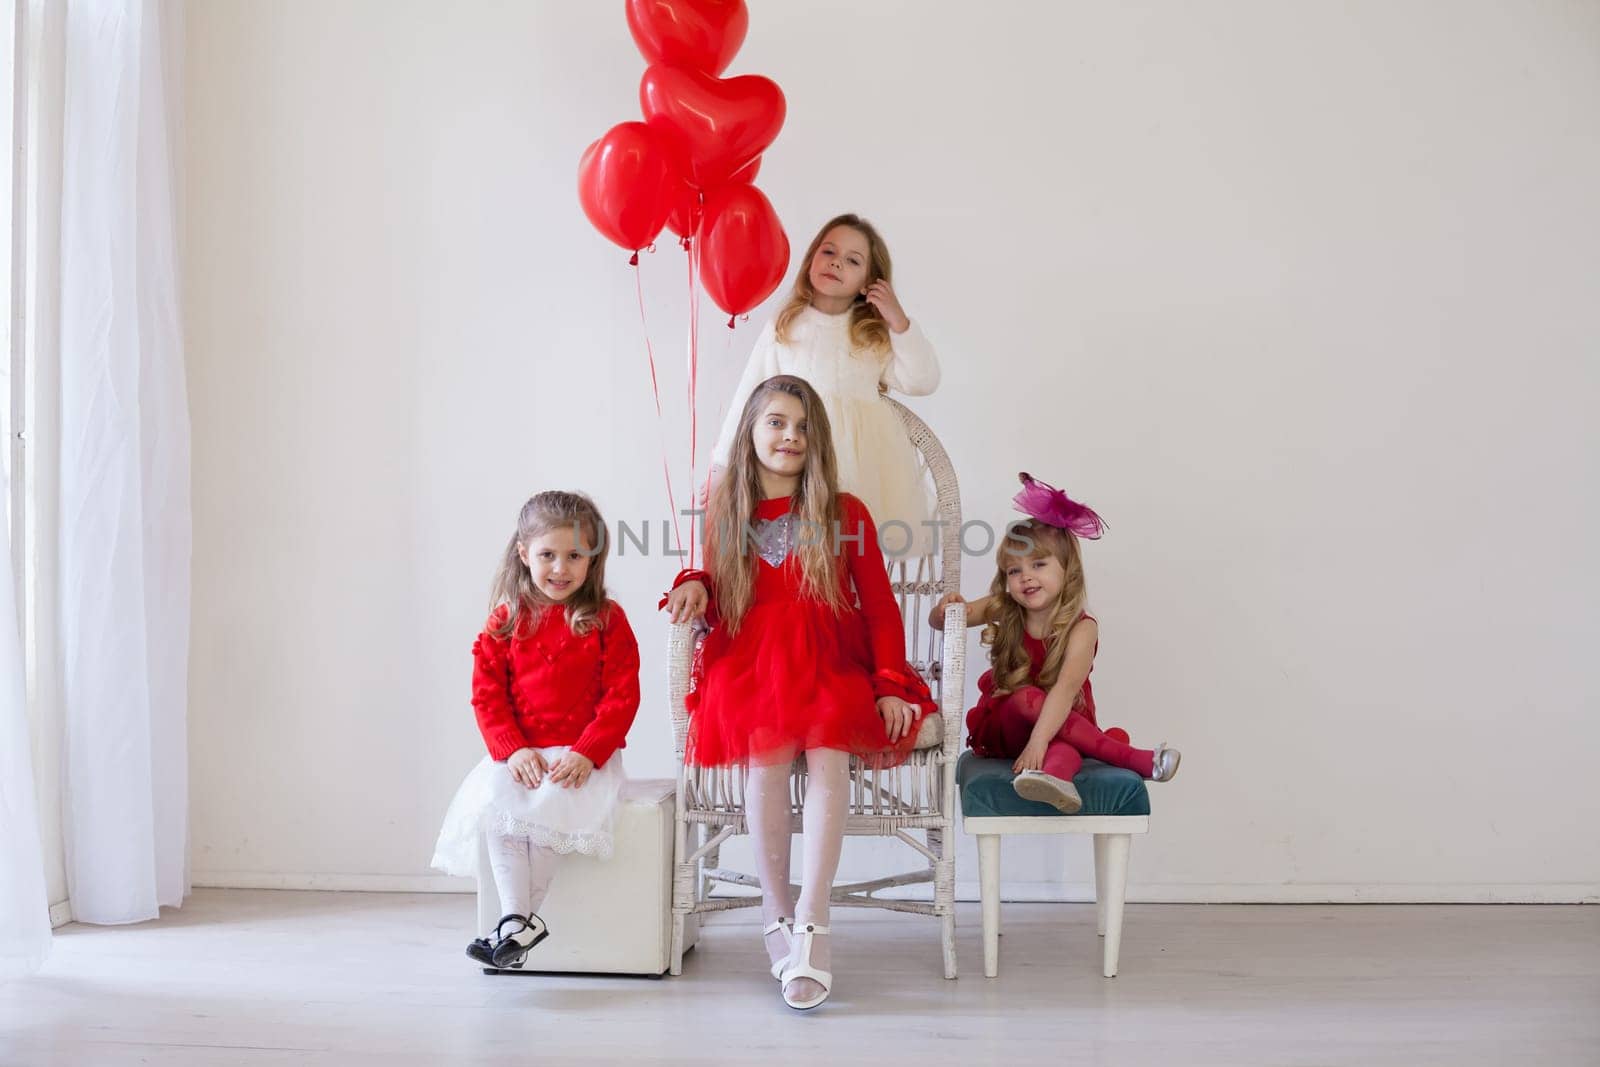 Girls with red heart-shaped balloons on birthday